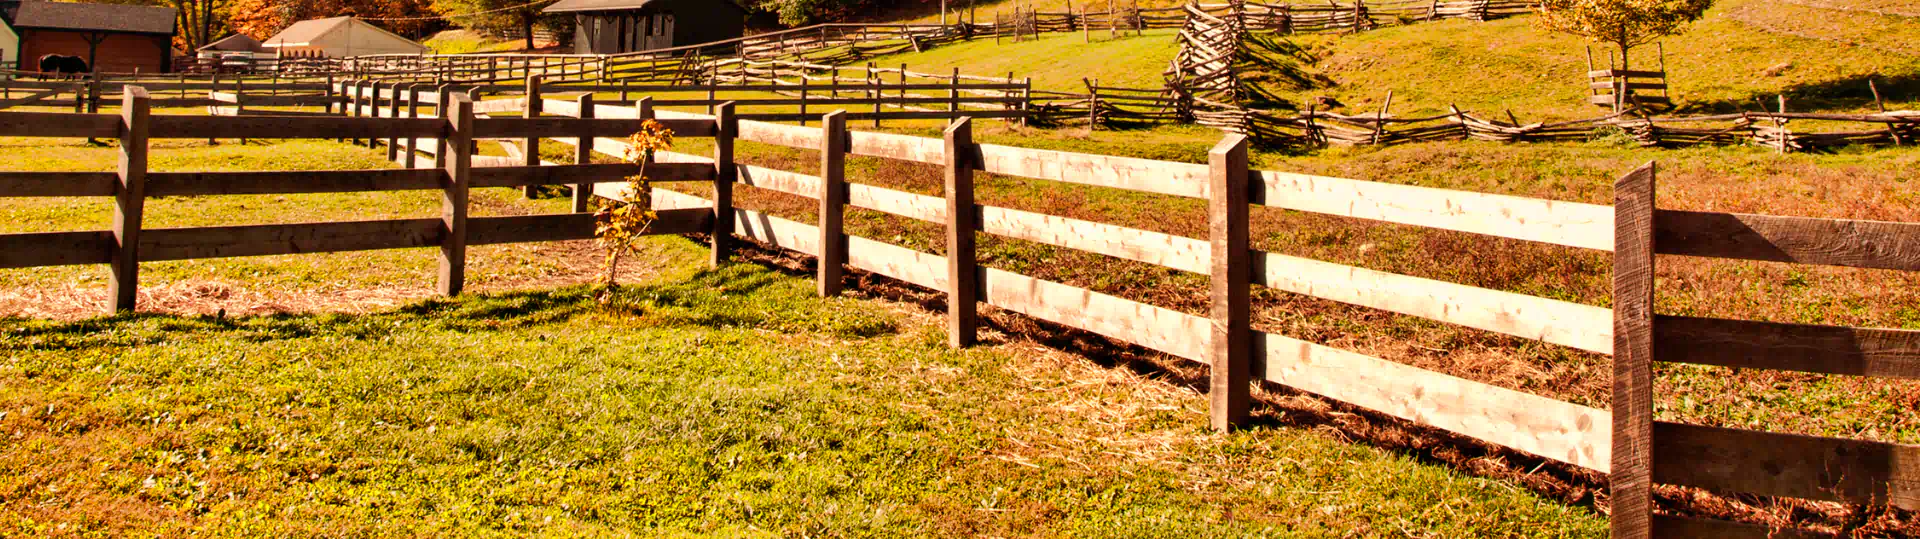 afternoon on the farm with fence